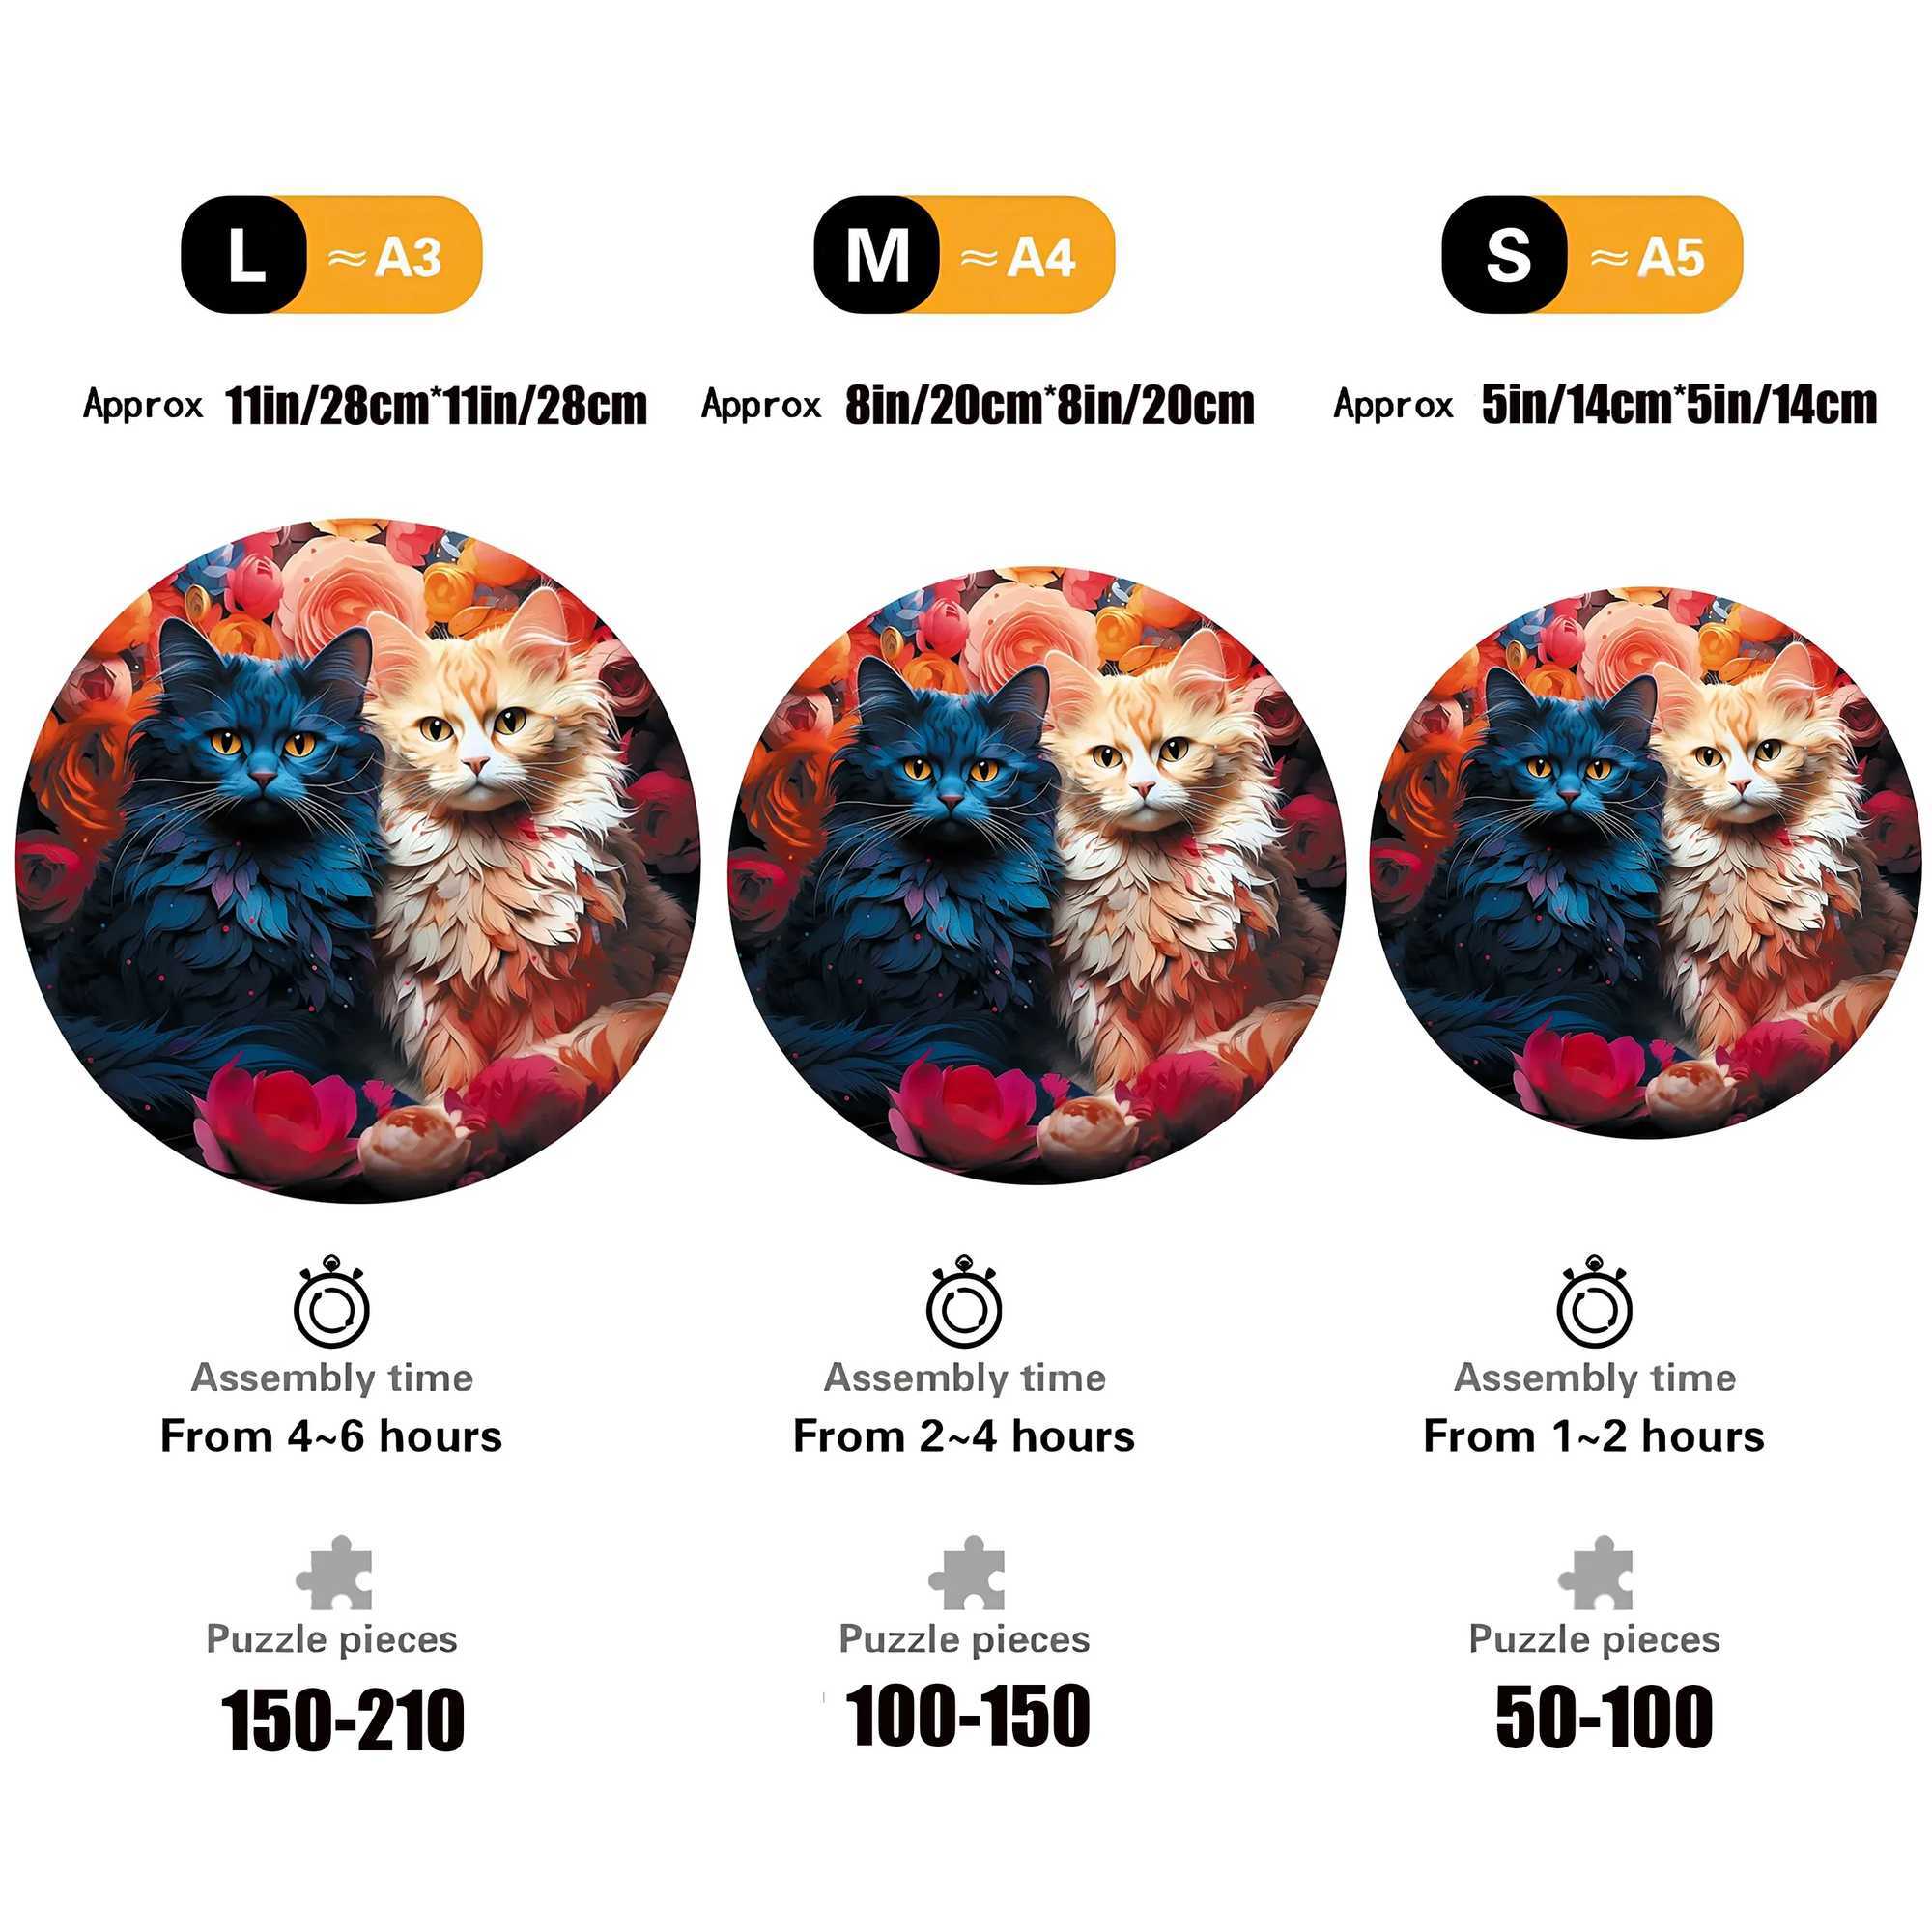 3D Puzzles Mysterious Cat Animal Jigsaw Puzzles Adults Creative Wooden DIY Crafts Birthday Gift Colorful Parent-child Educational Toys 240419